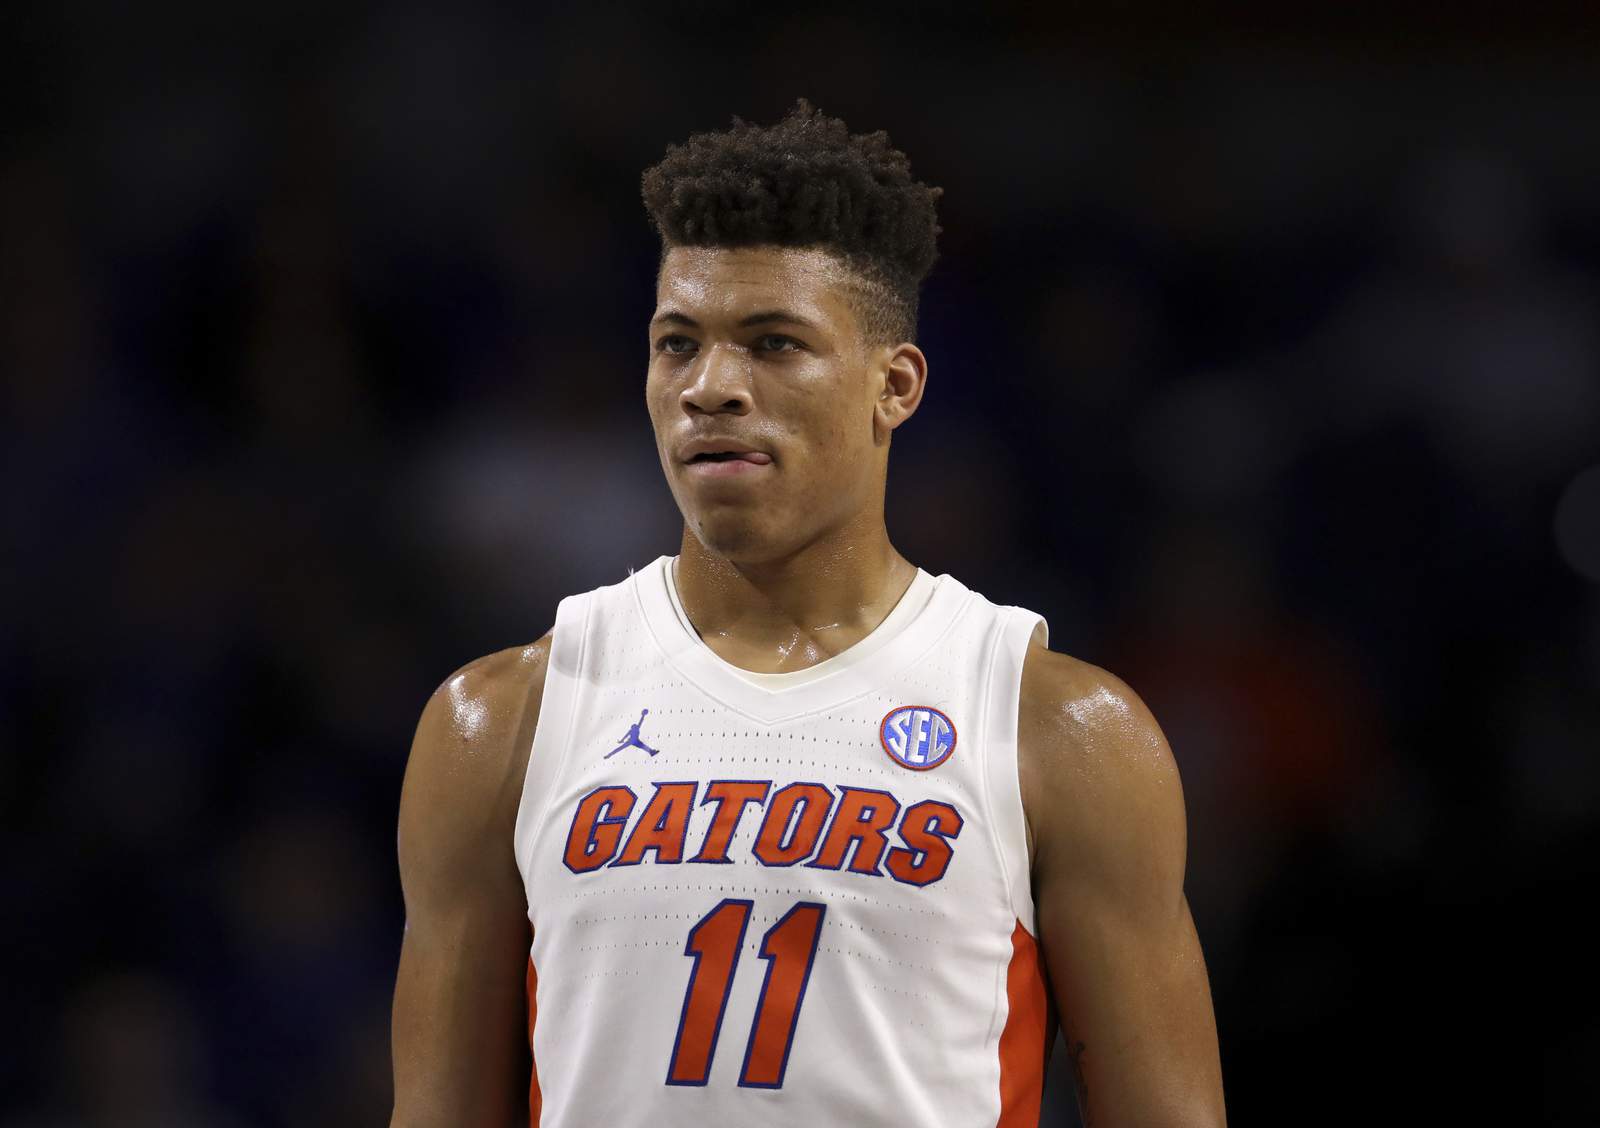 Home for the holidays: Florida’s Keyontae Johnson to be released from hospital